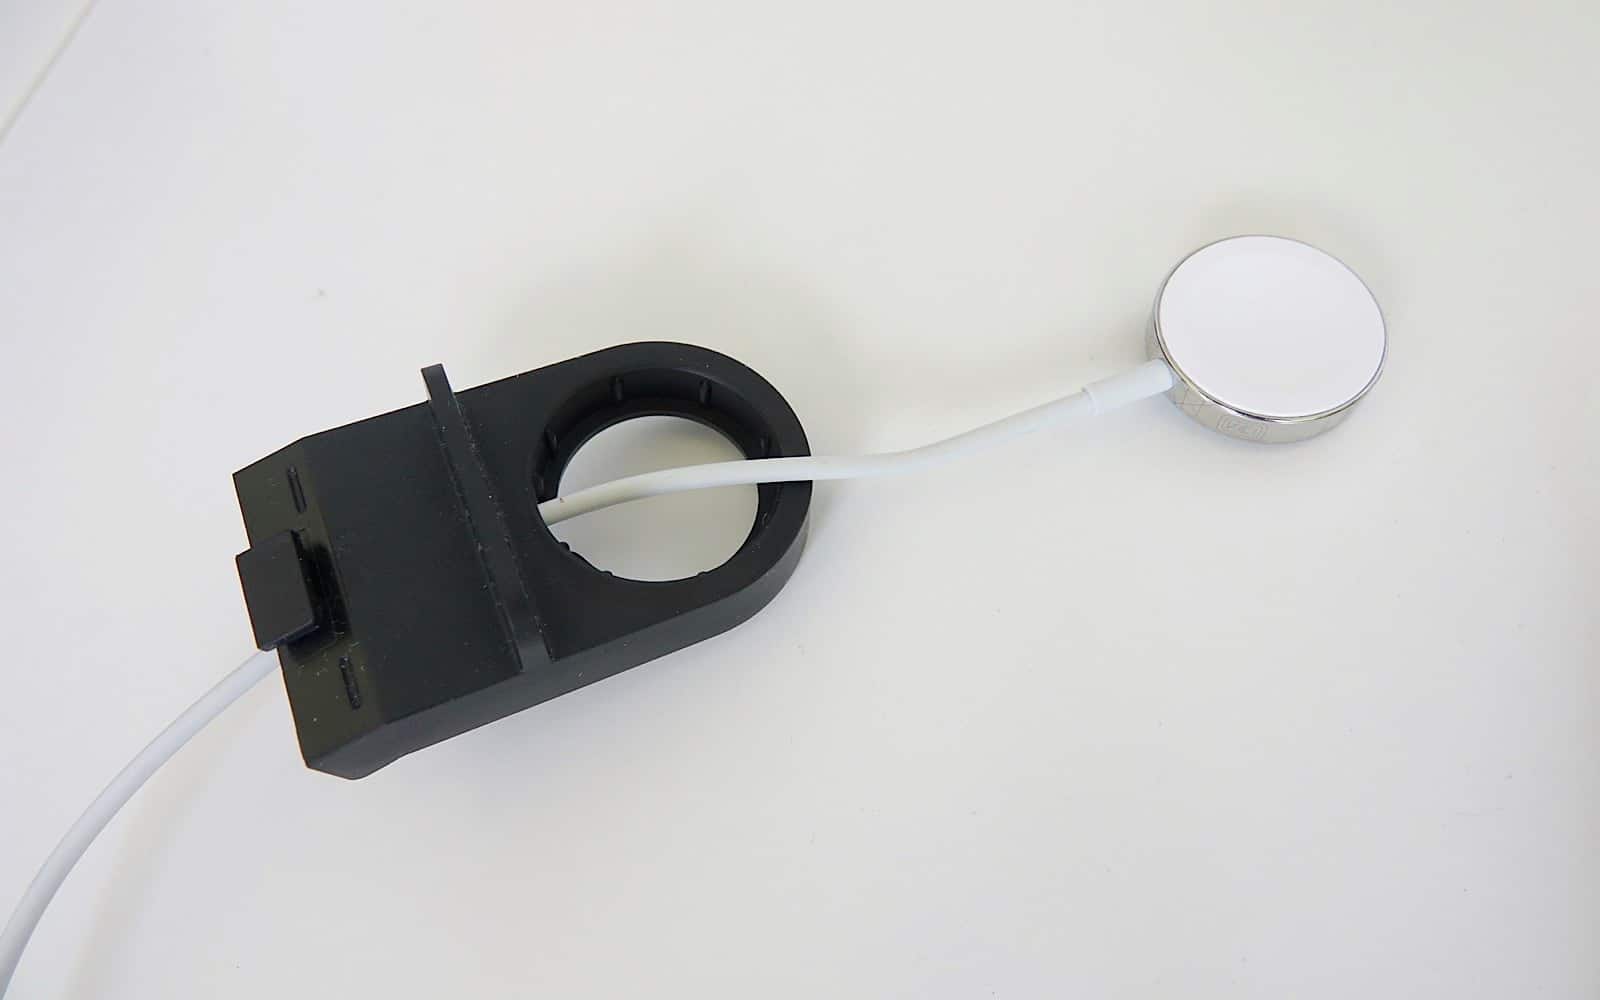 The Apple Watch stand requires your own Apple Watch charger to be threaded through.